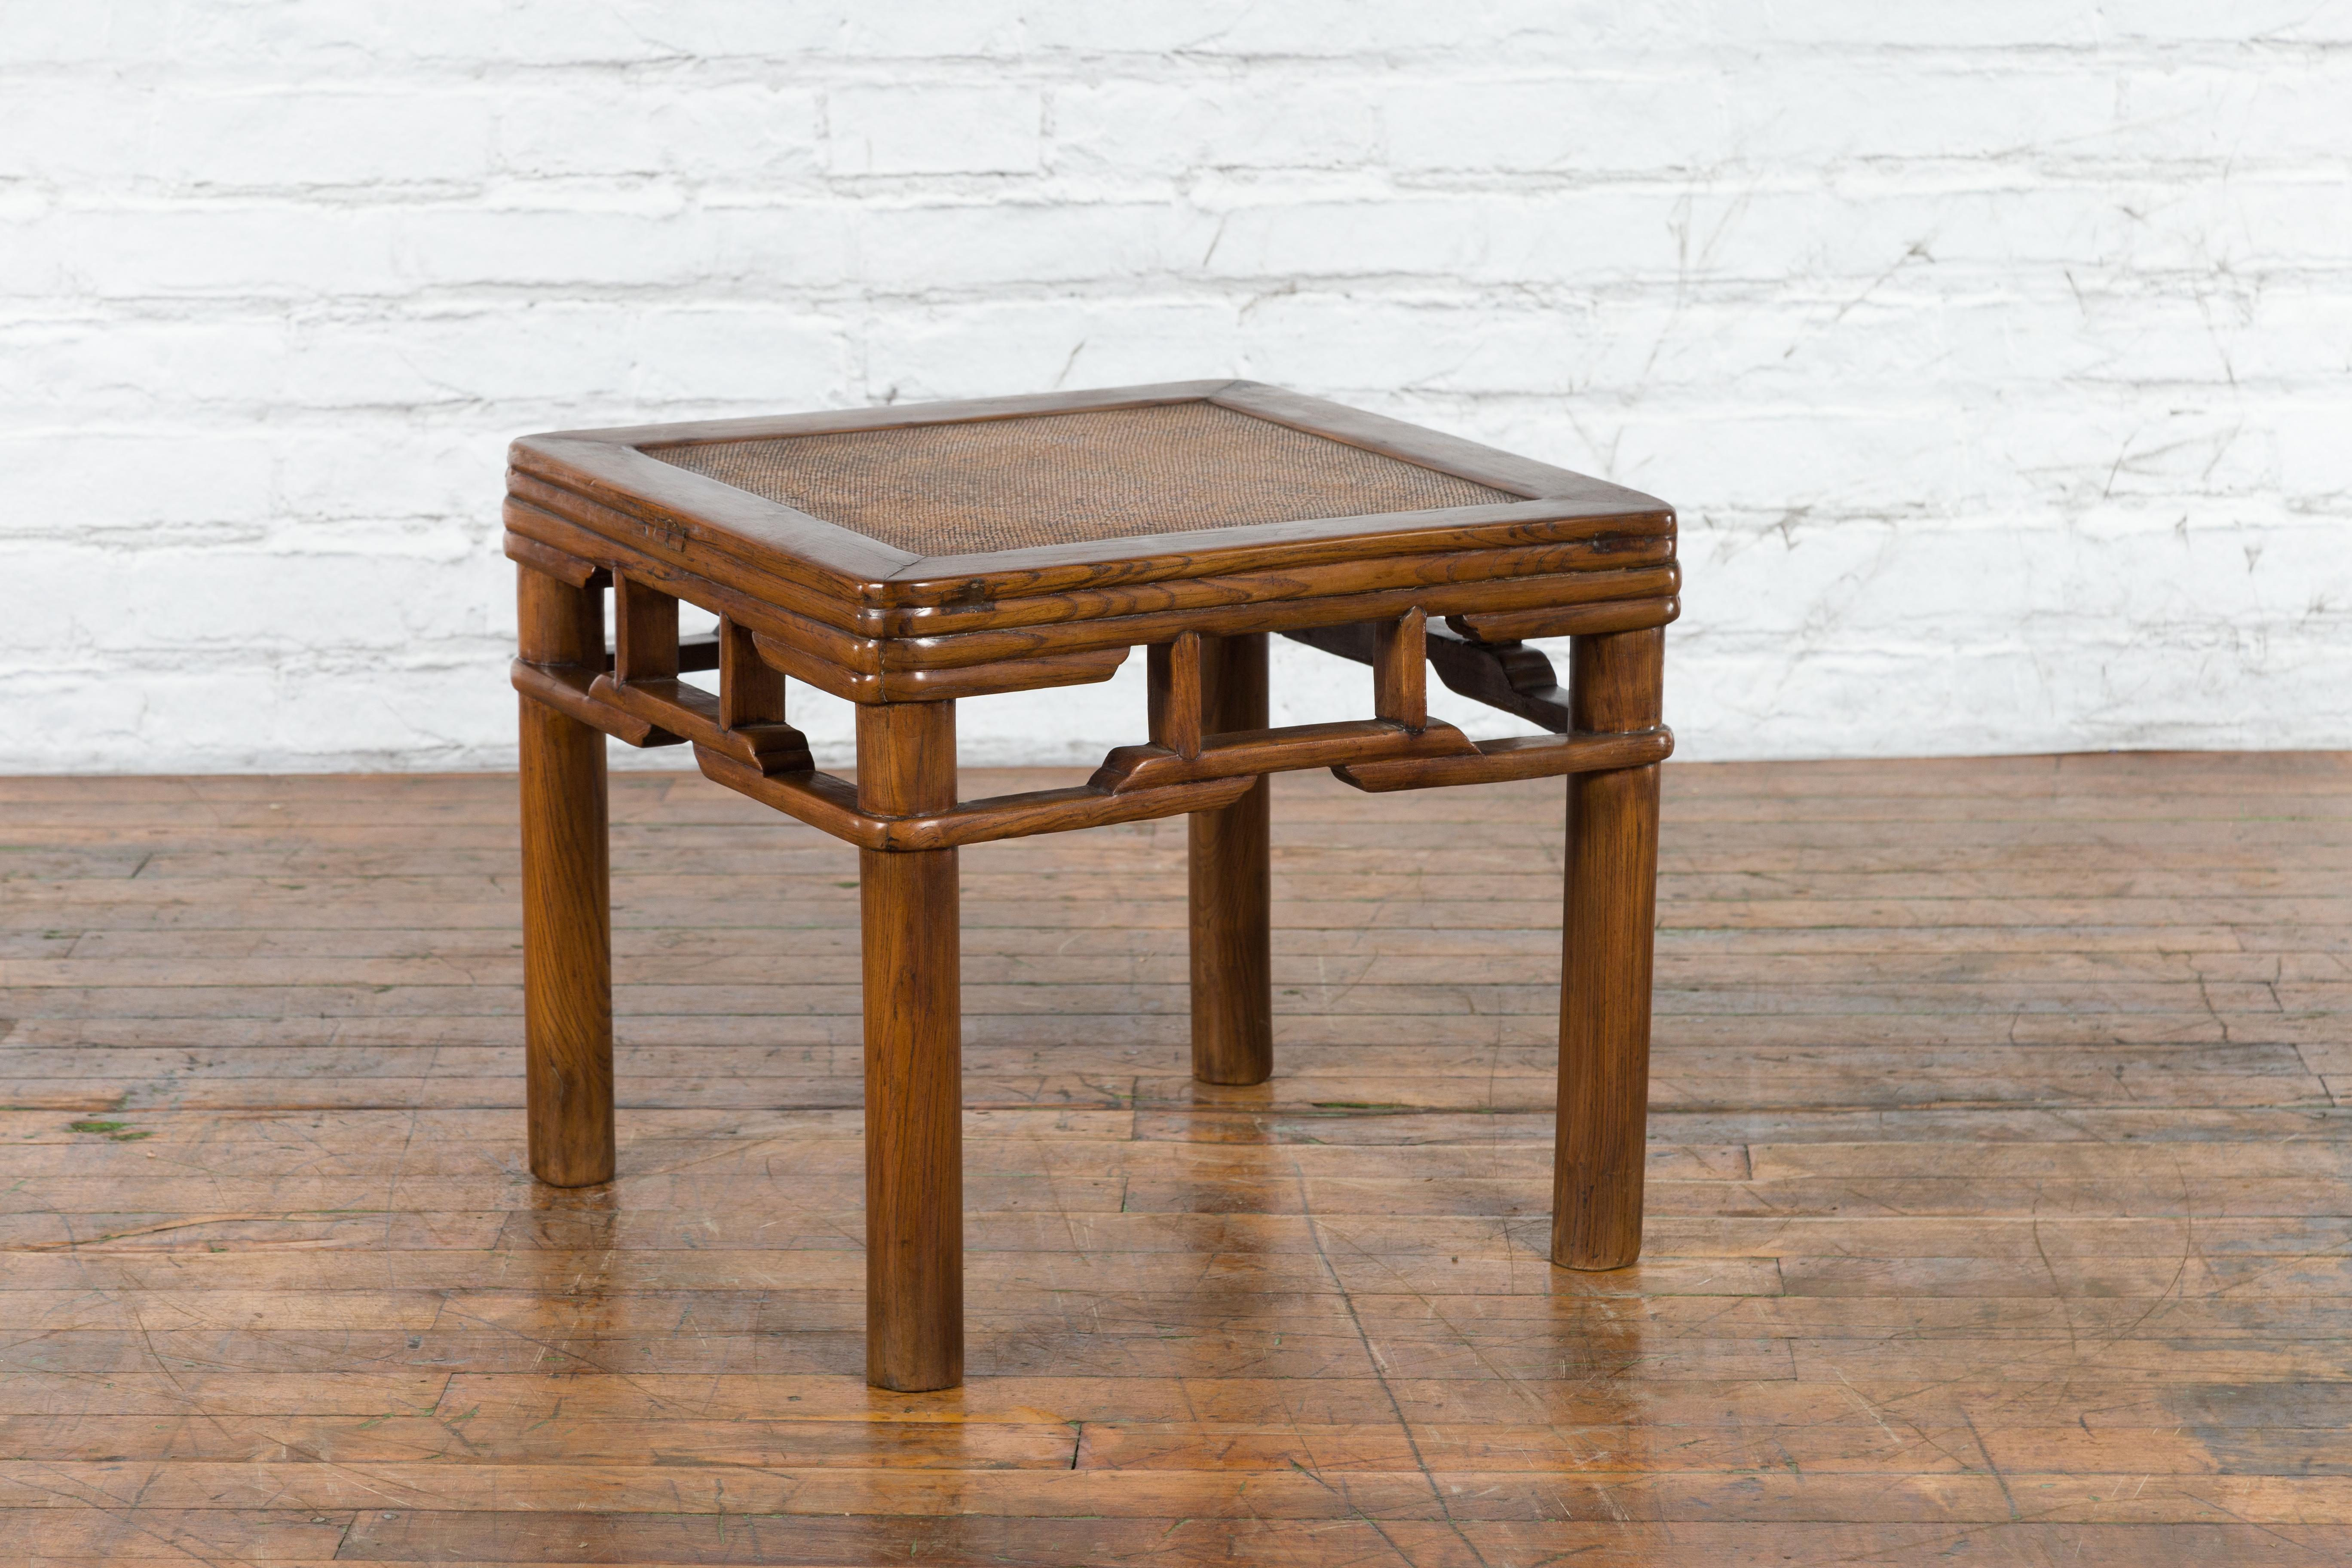 Chinese Qing Dynasty Early 20th Century Elmwood Side Table with Woven Rattan Top For Sale 1